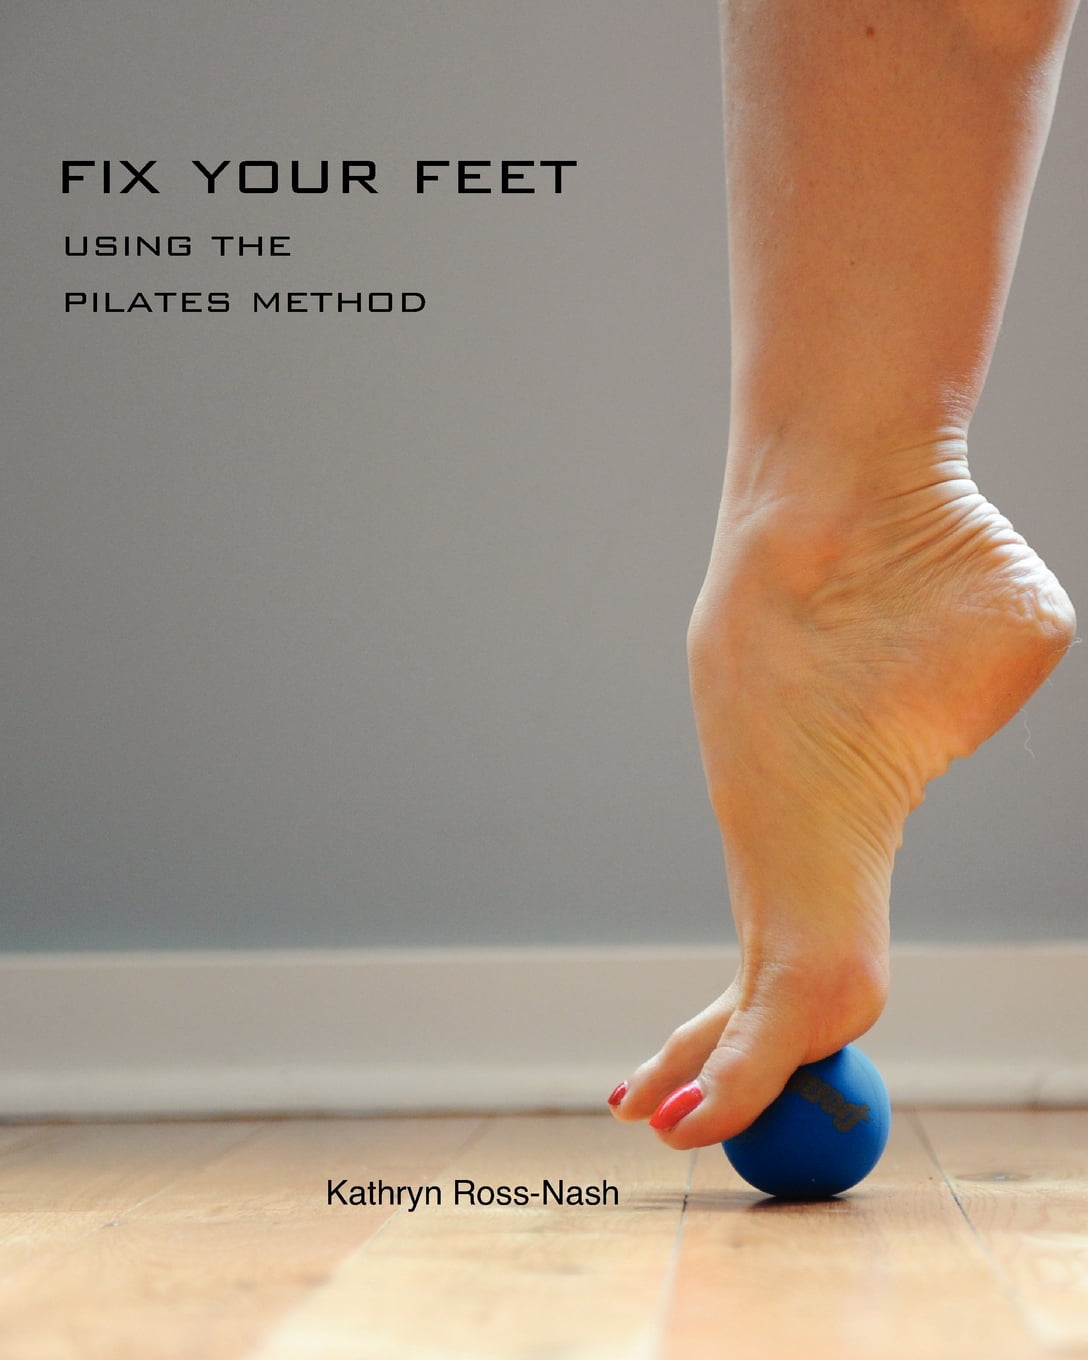 [How To] Download and Read Fix Your Feet Using The Pilates Method